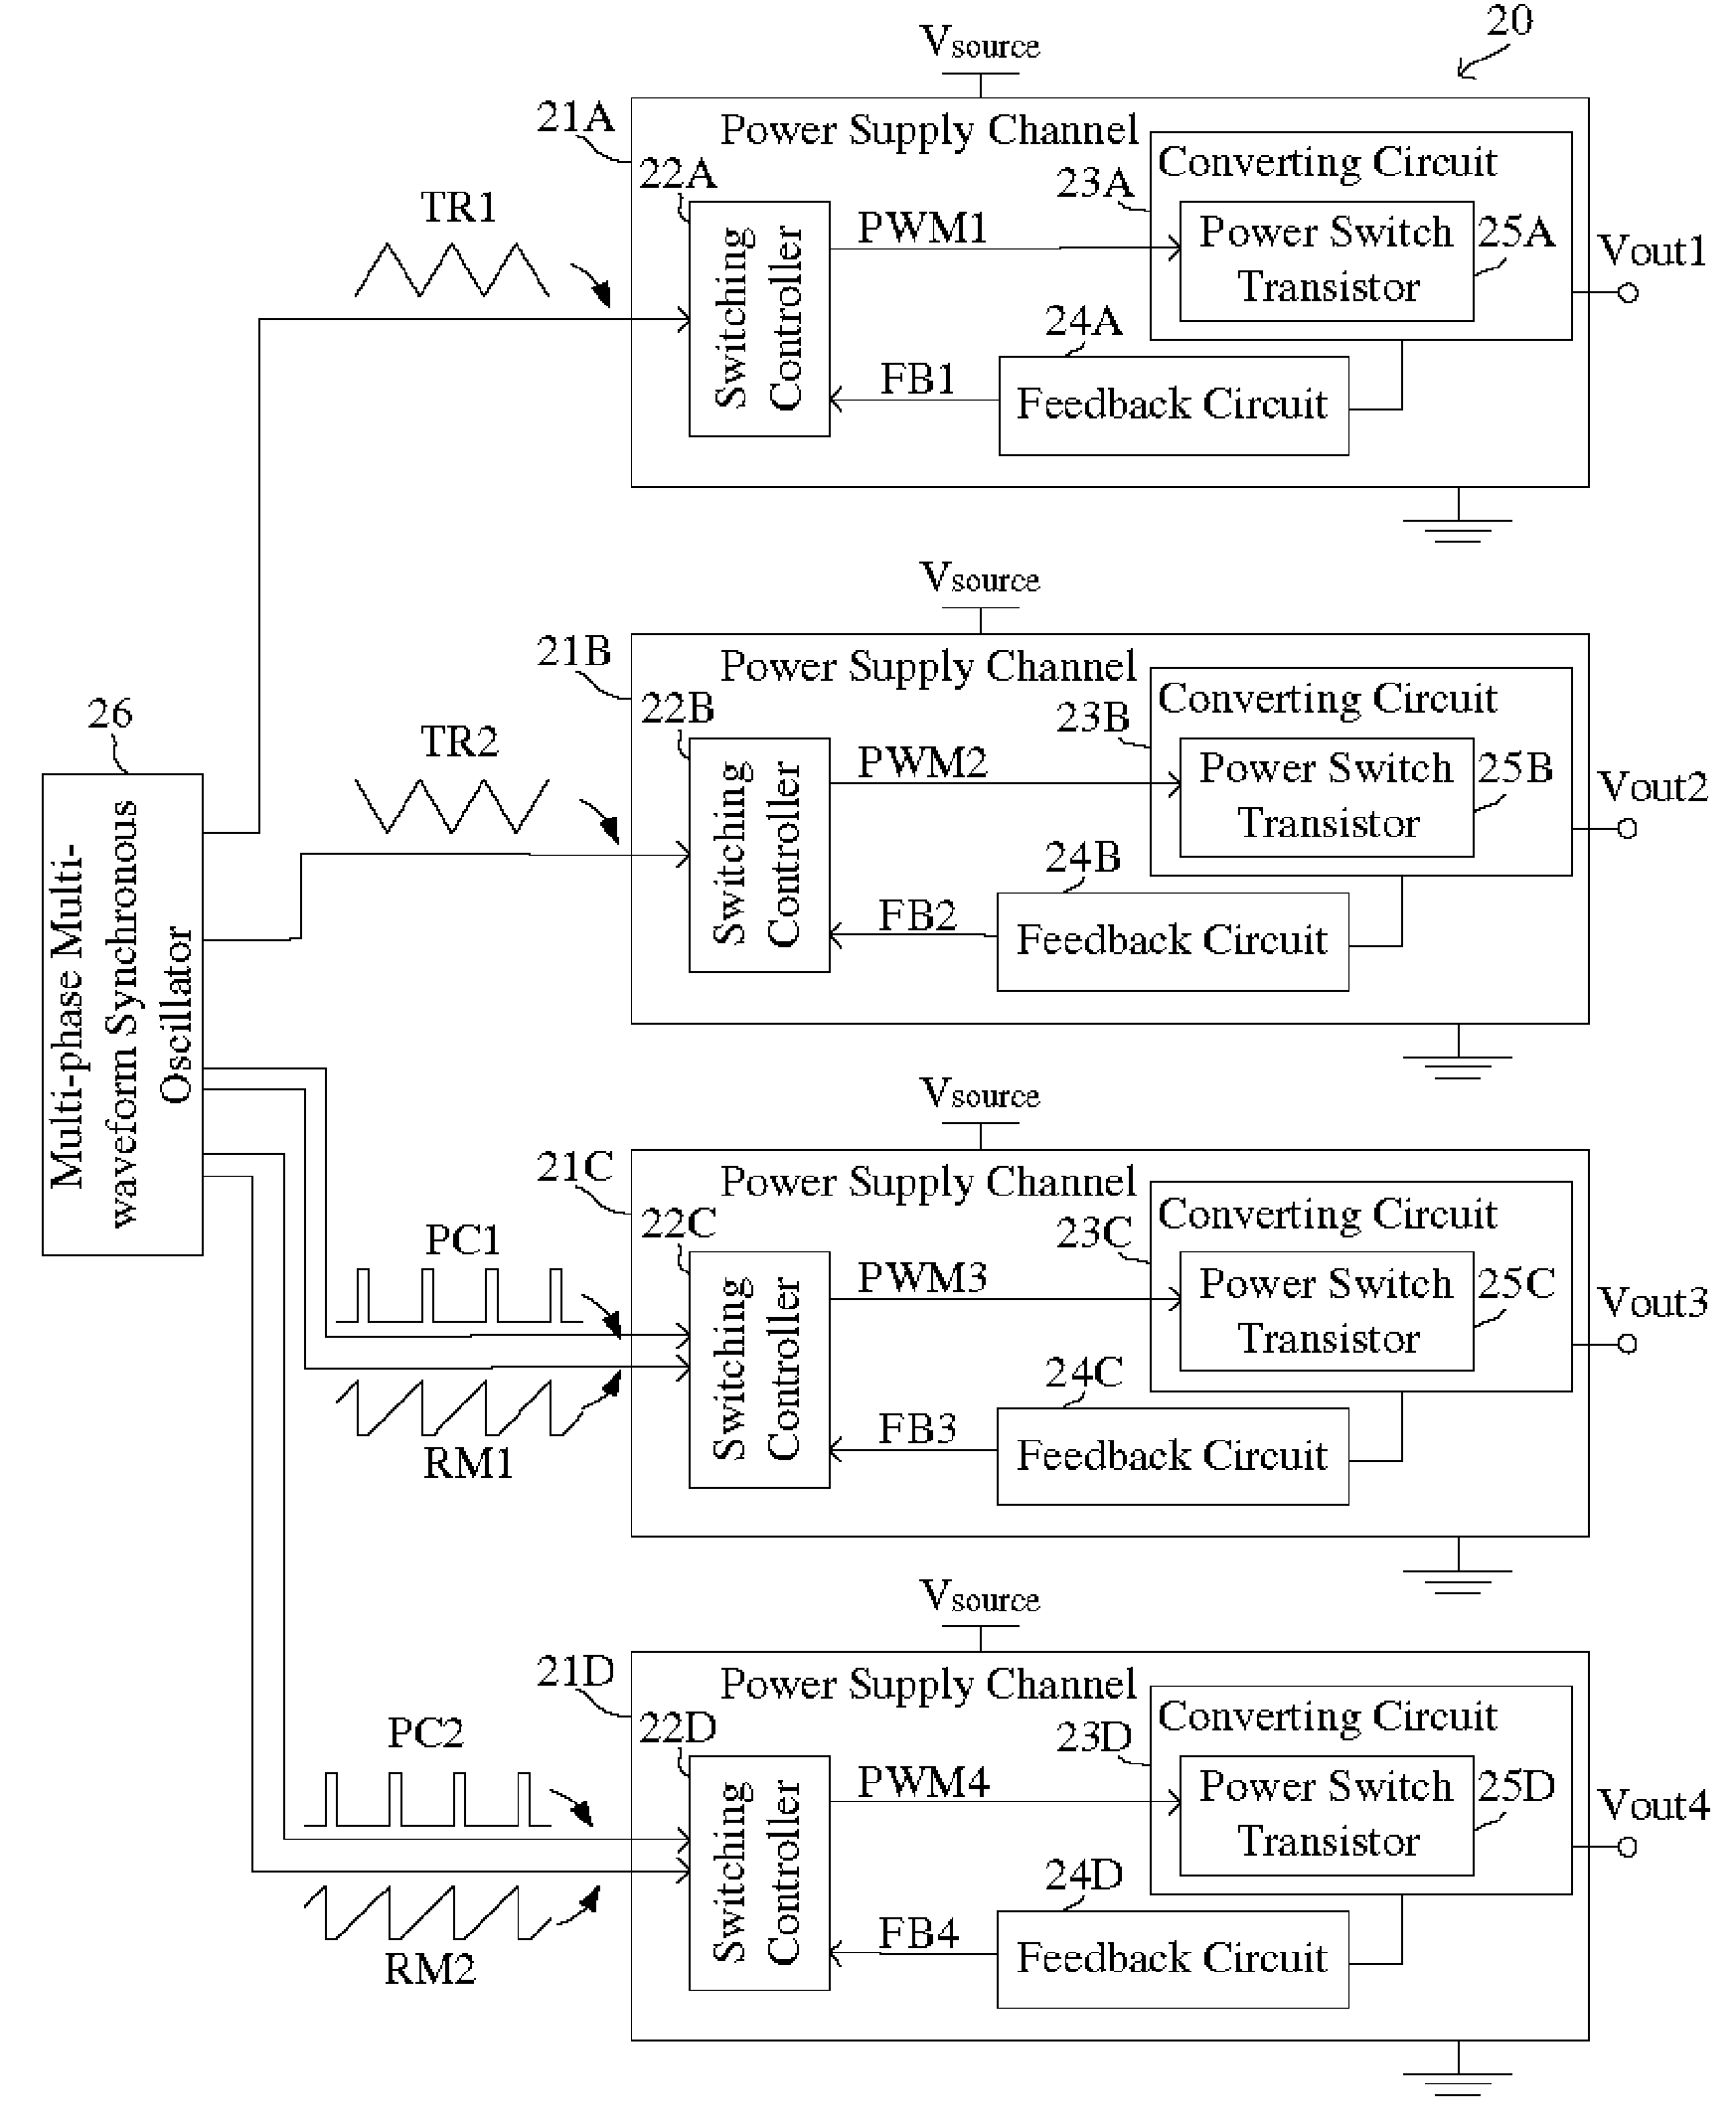 Switching dc-to-dc converter with multiple output voltages